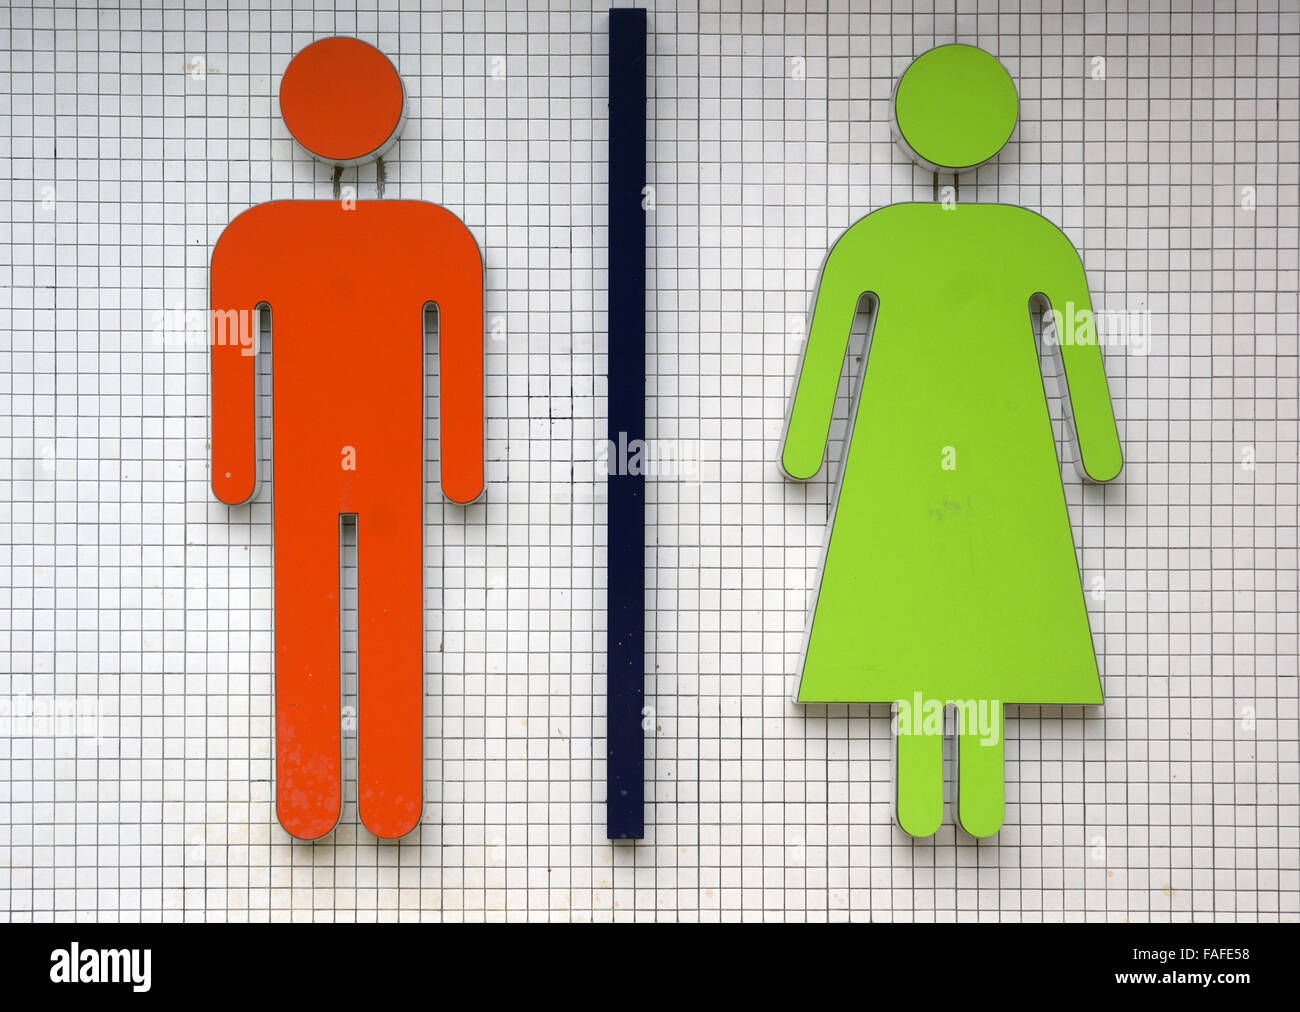 Islamic toilet sign with long skirt Stock Photo